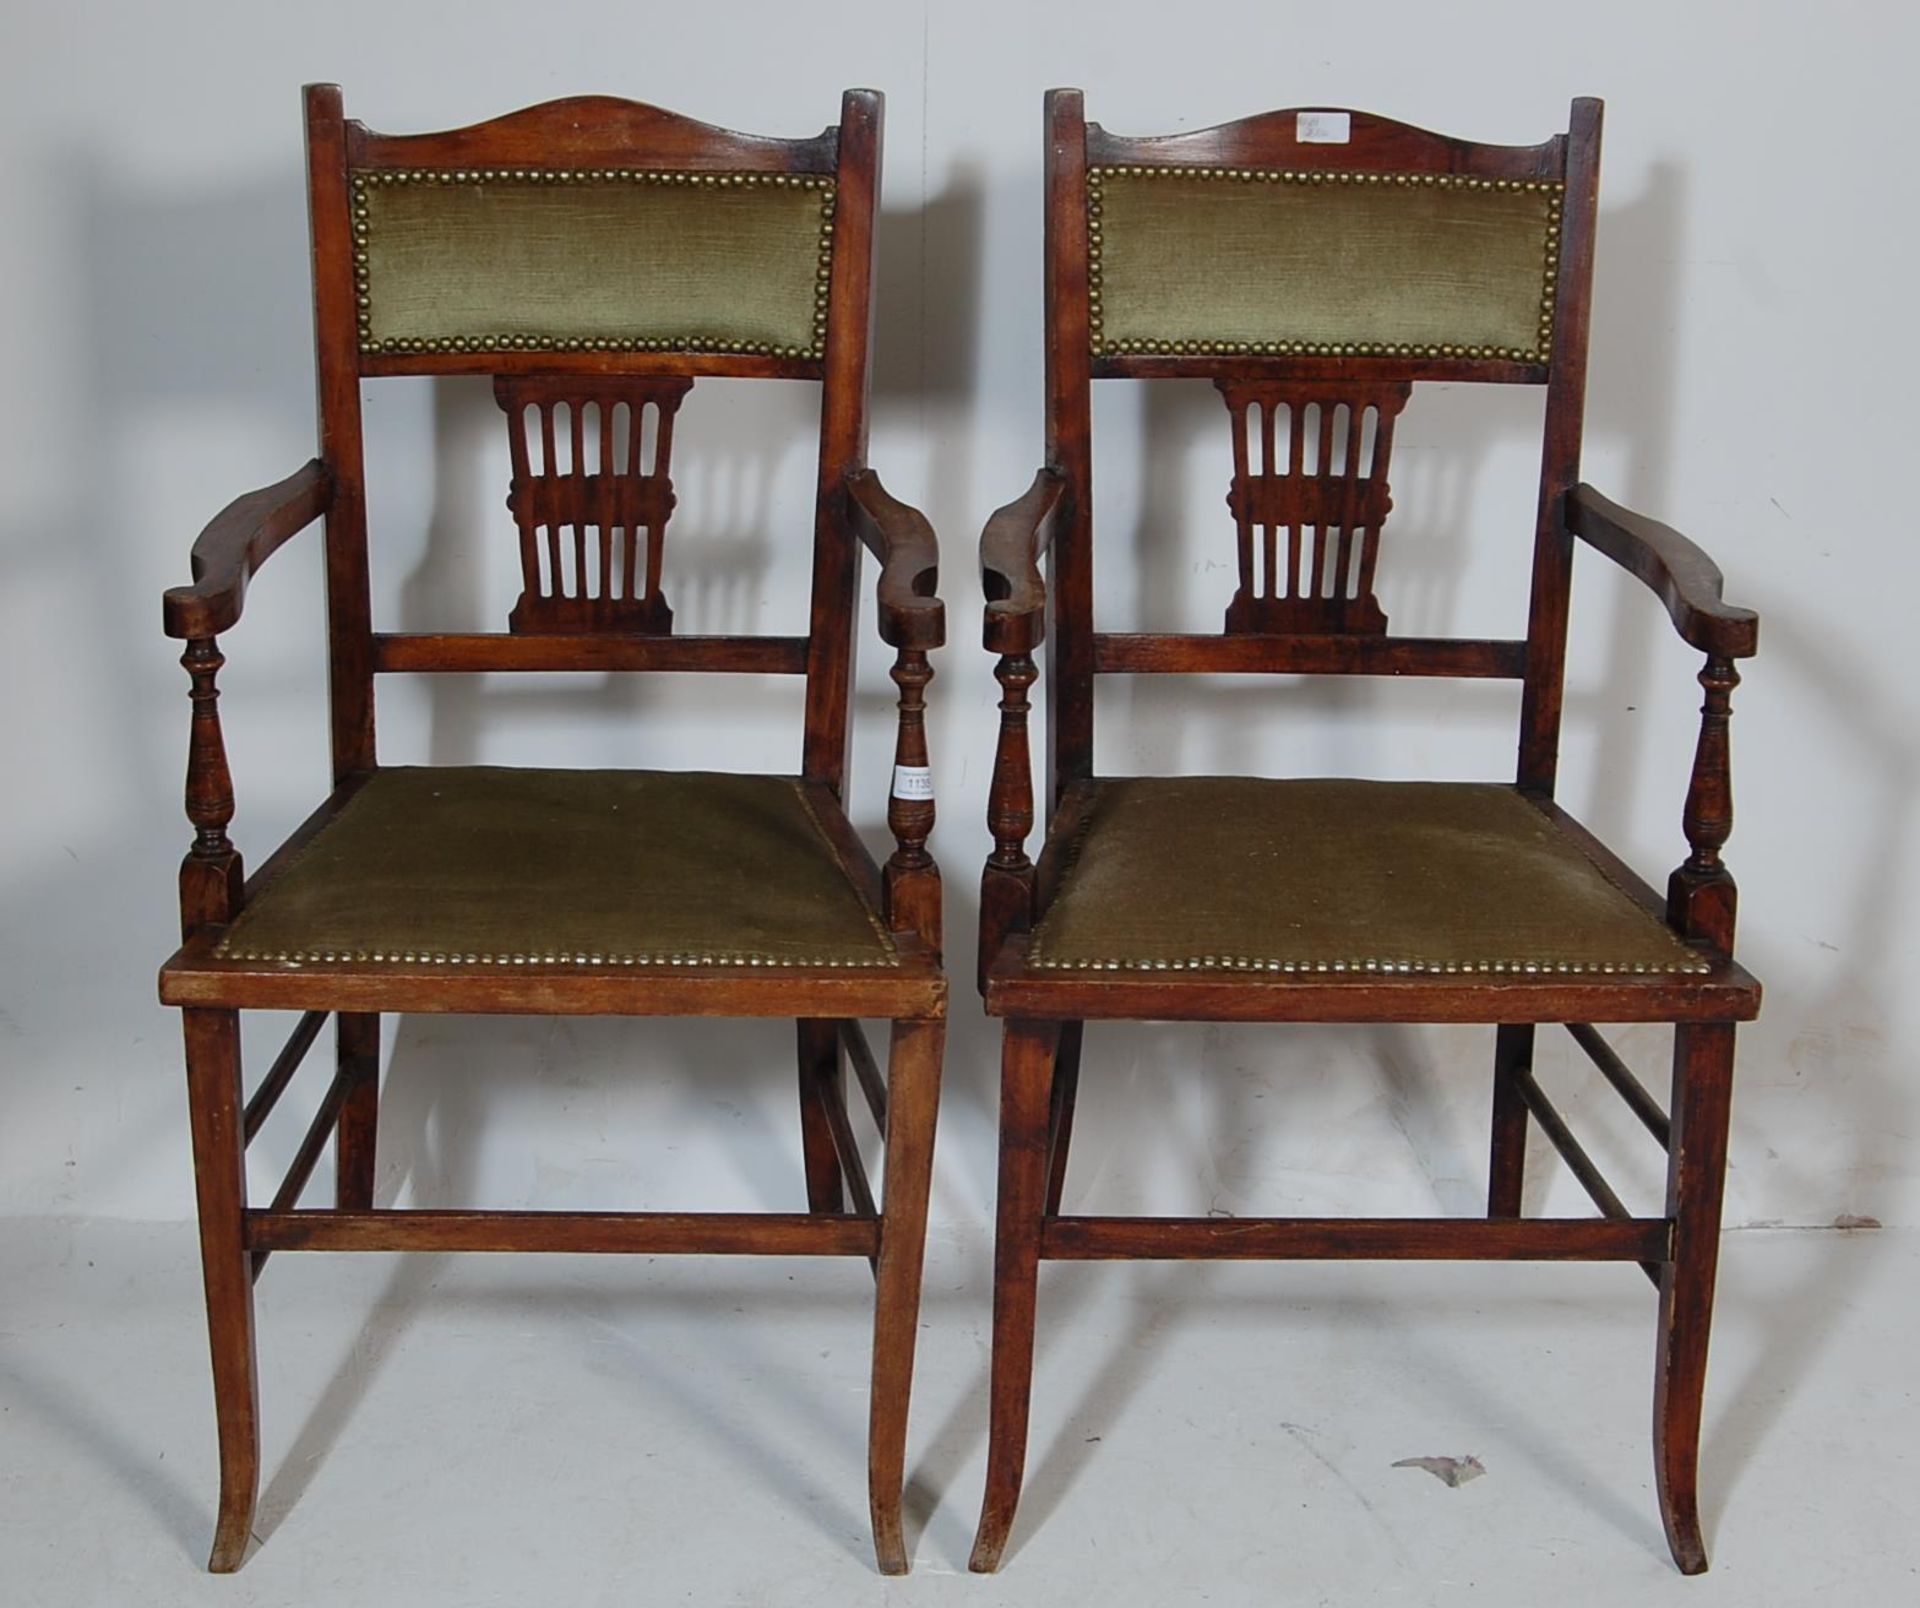 TWO 19TH CENTURY LATE VICTORIAN BEDROOM CHAIRS - Image 2 of 5